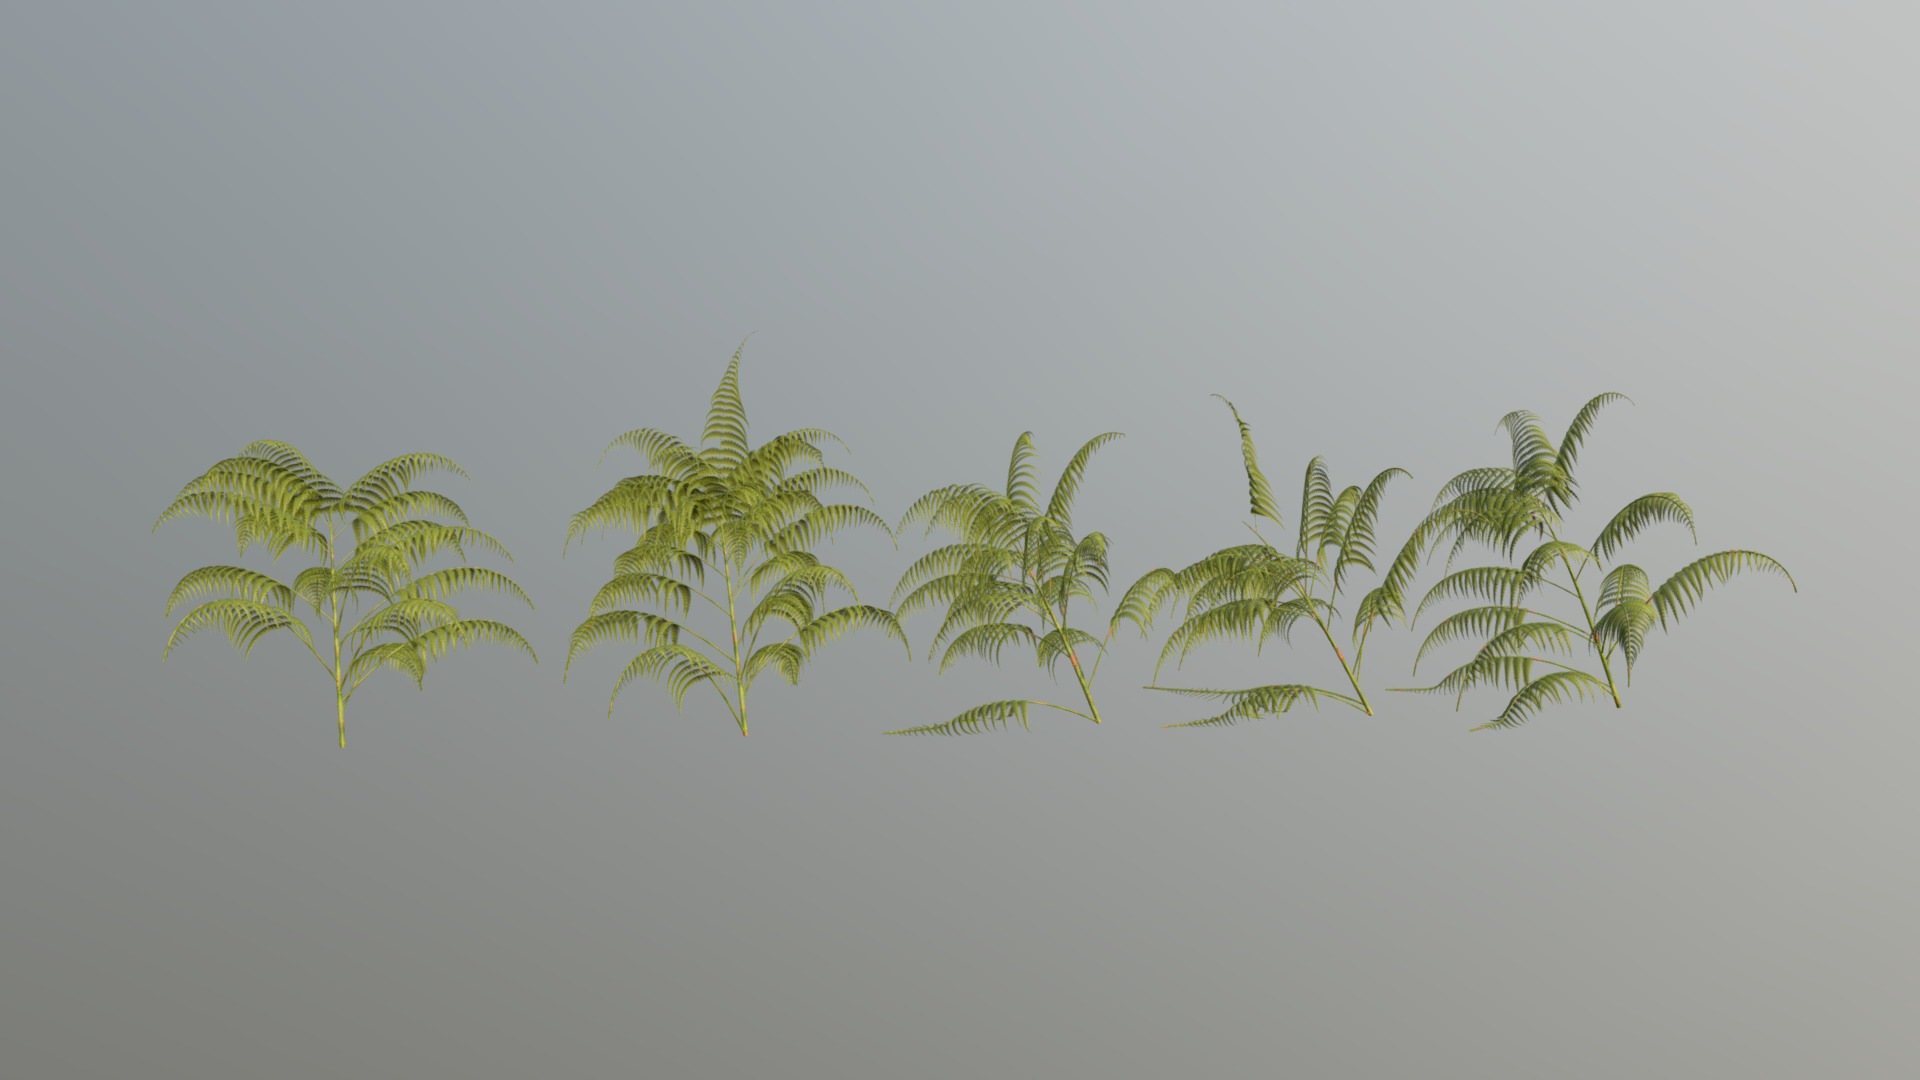 Hi all,

This is fern pack created in Blender. It includes 5 different models in real world scale (centimetres). It comes in following formats:

.blend

.fbx

.obj

The blender files have the shaders set up, so they are ready to render using Cycles. 

It also comes with set of 1K .png maps 3d model